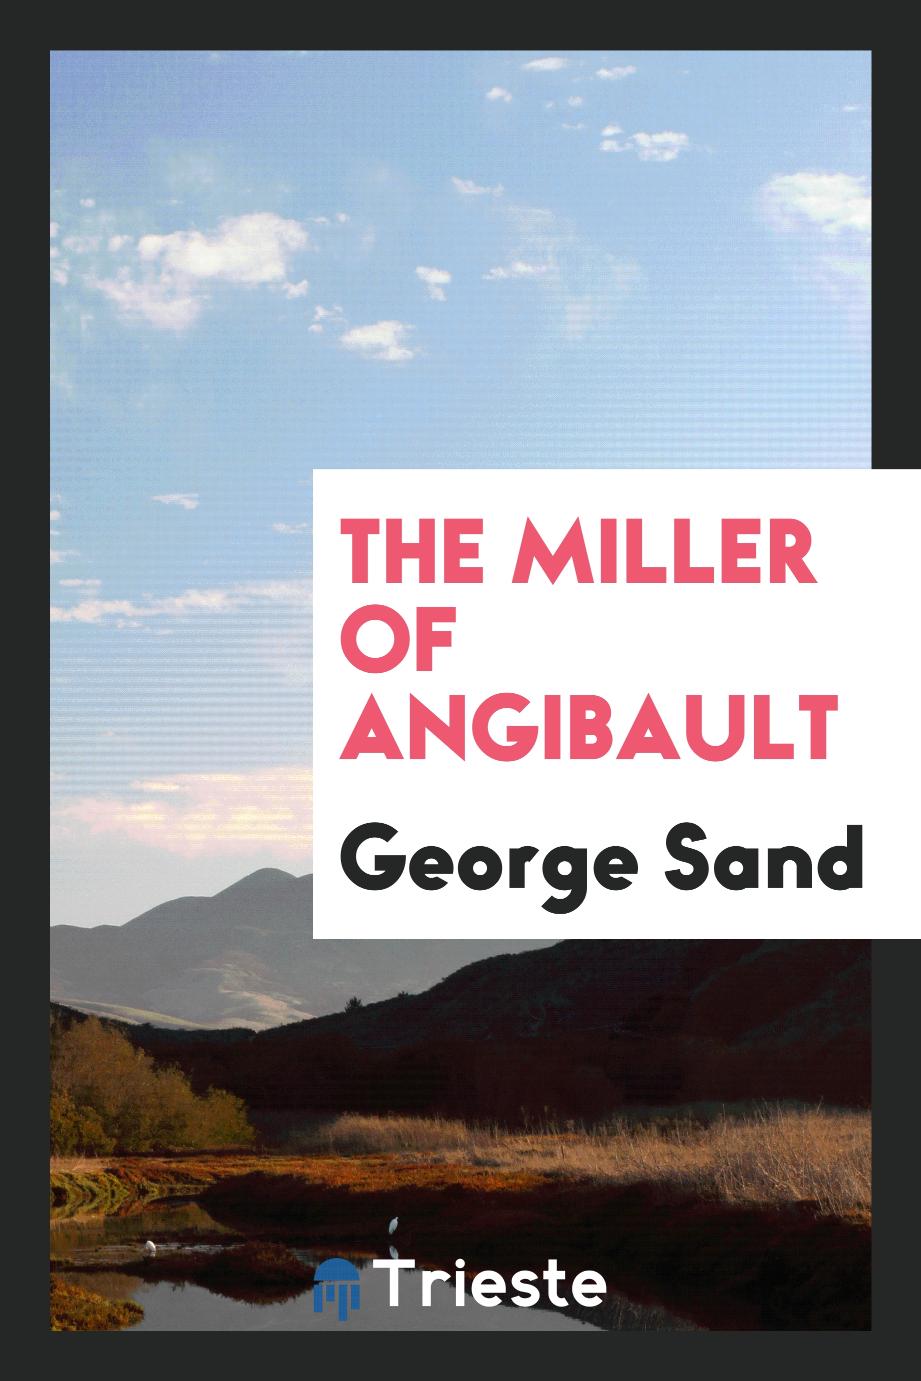 The Miller of Angibault